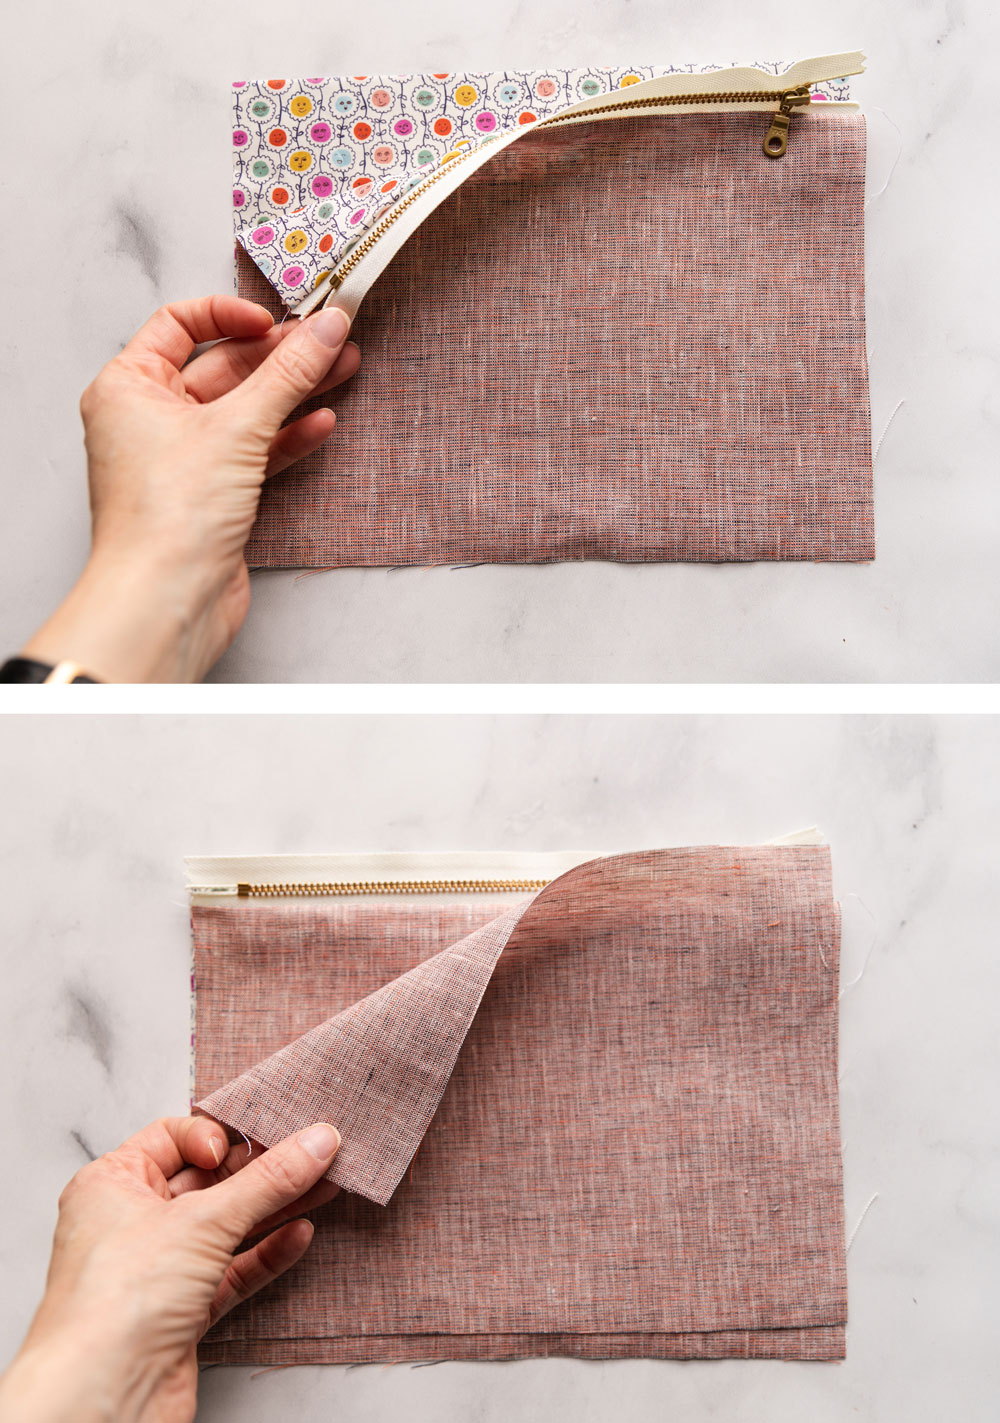 This easy zipper pouch tutorial shows exactly how to sew a simple pouch using scrap fabric and a zipper of any size. suzyquilts.com #zipperpouch #pouchtutorial